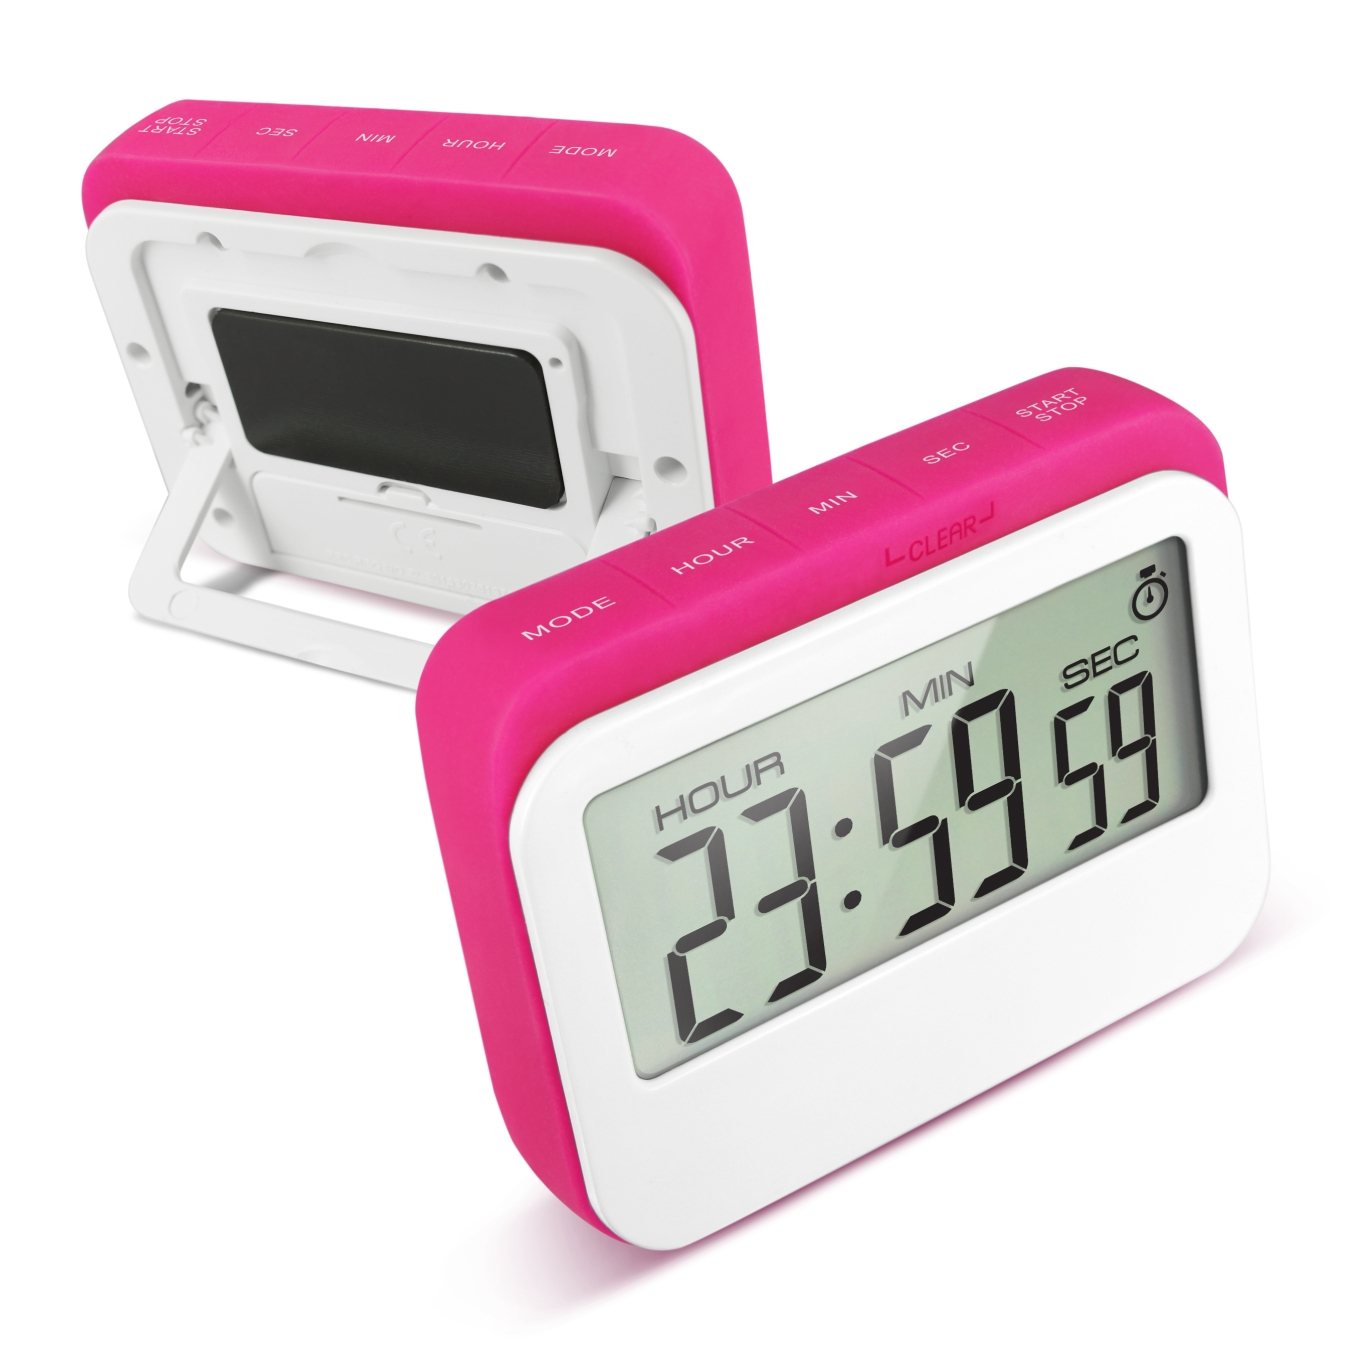 CR-320 Jumbo Display Timer with Clock - Click Image to Close